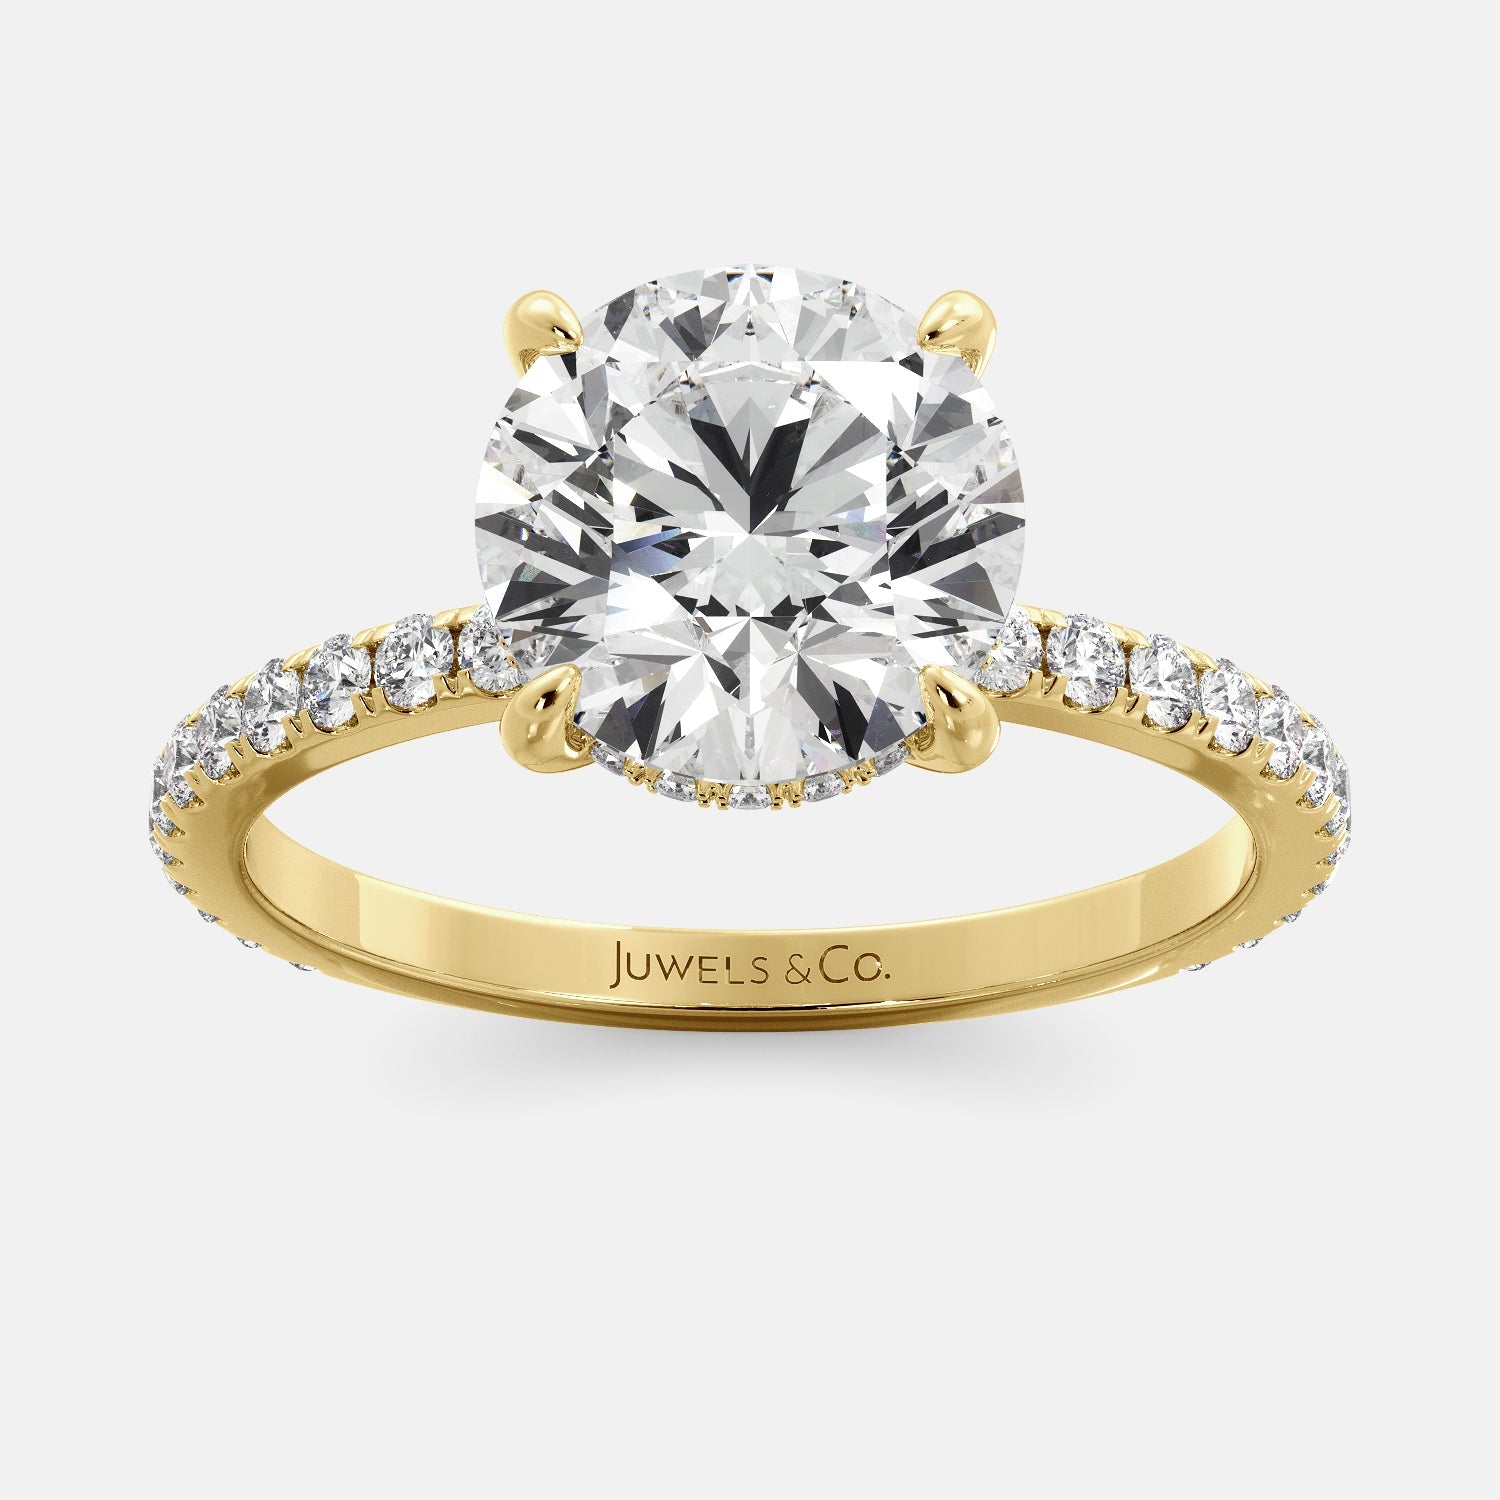 Lab-grown Round Cut Diamond with Pave Ring, 2-carat, yellow gold 14K